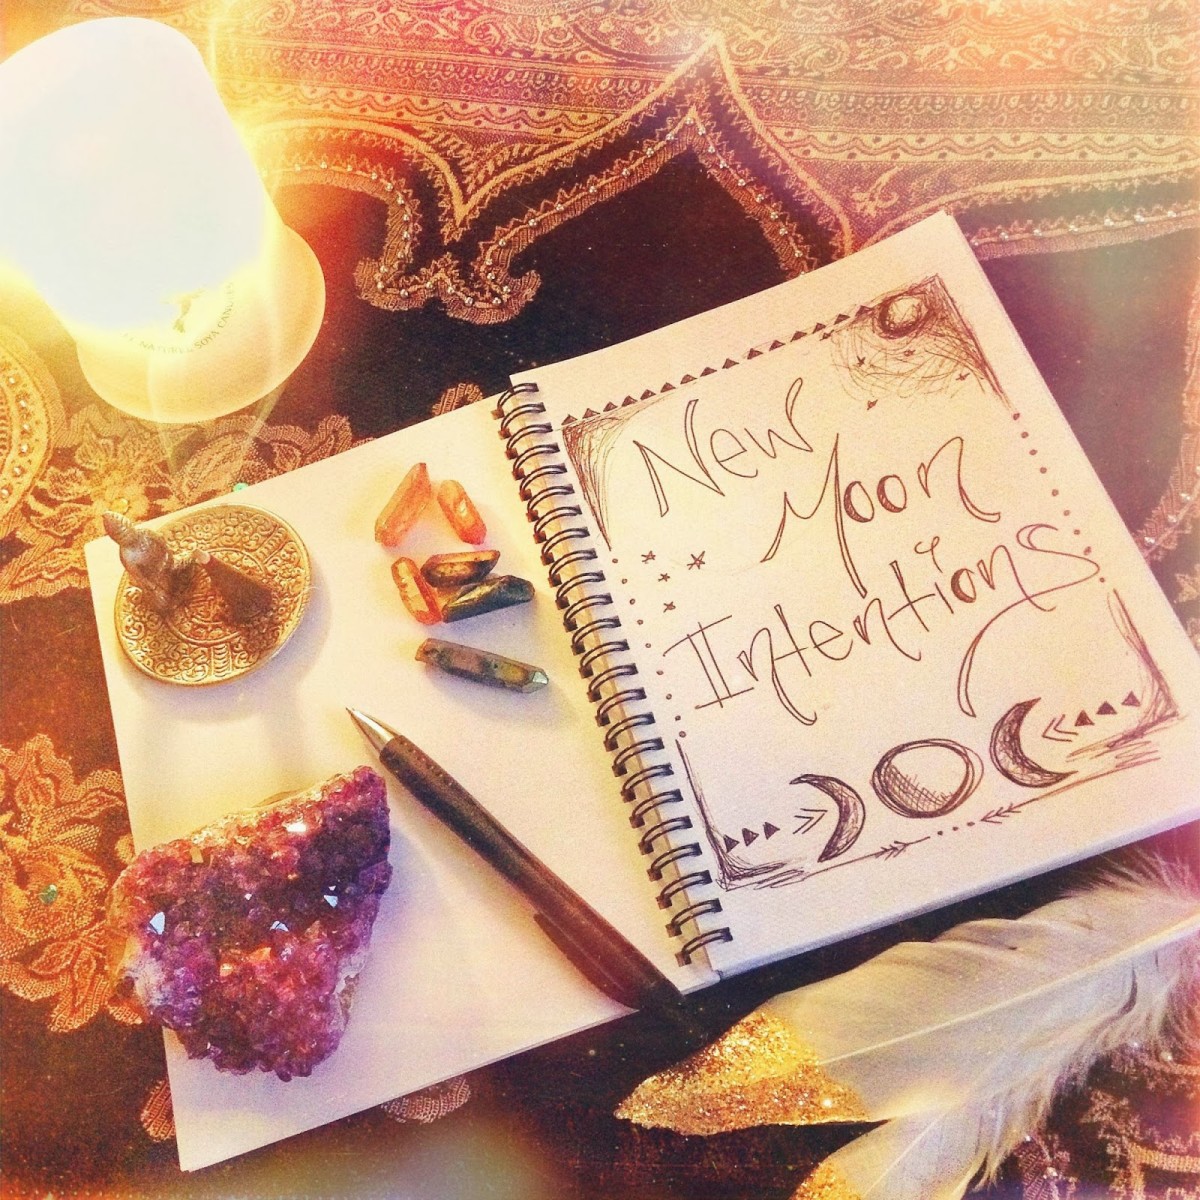 A journal is a helpful spiritual tool for moon-phase rituals.